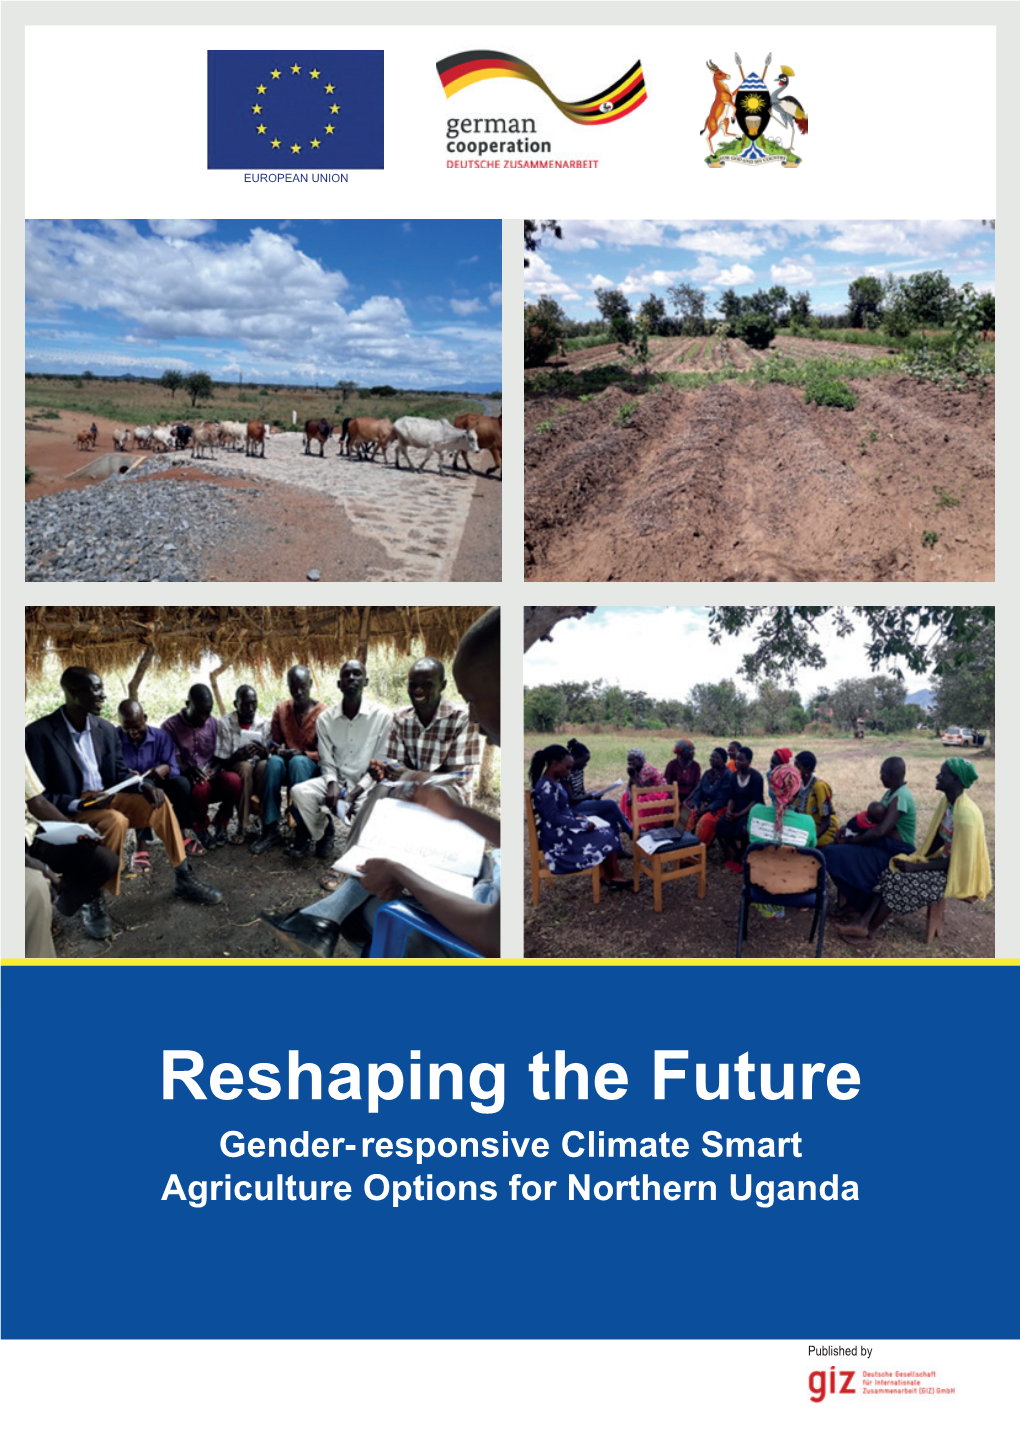 Reshaping the Future Gender- Responsive Climate Smart Agriculture Options for Northern Uganda